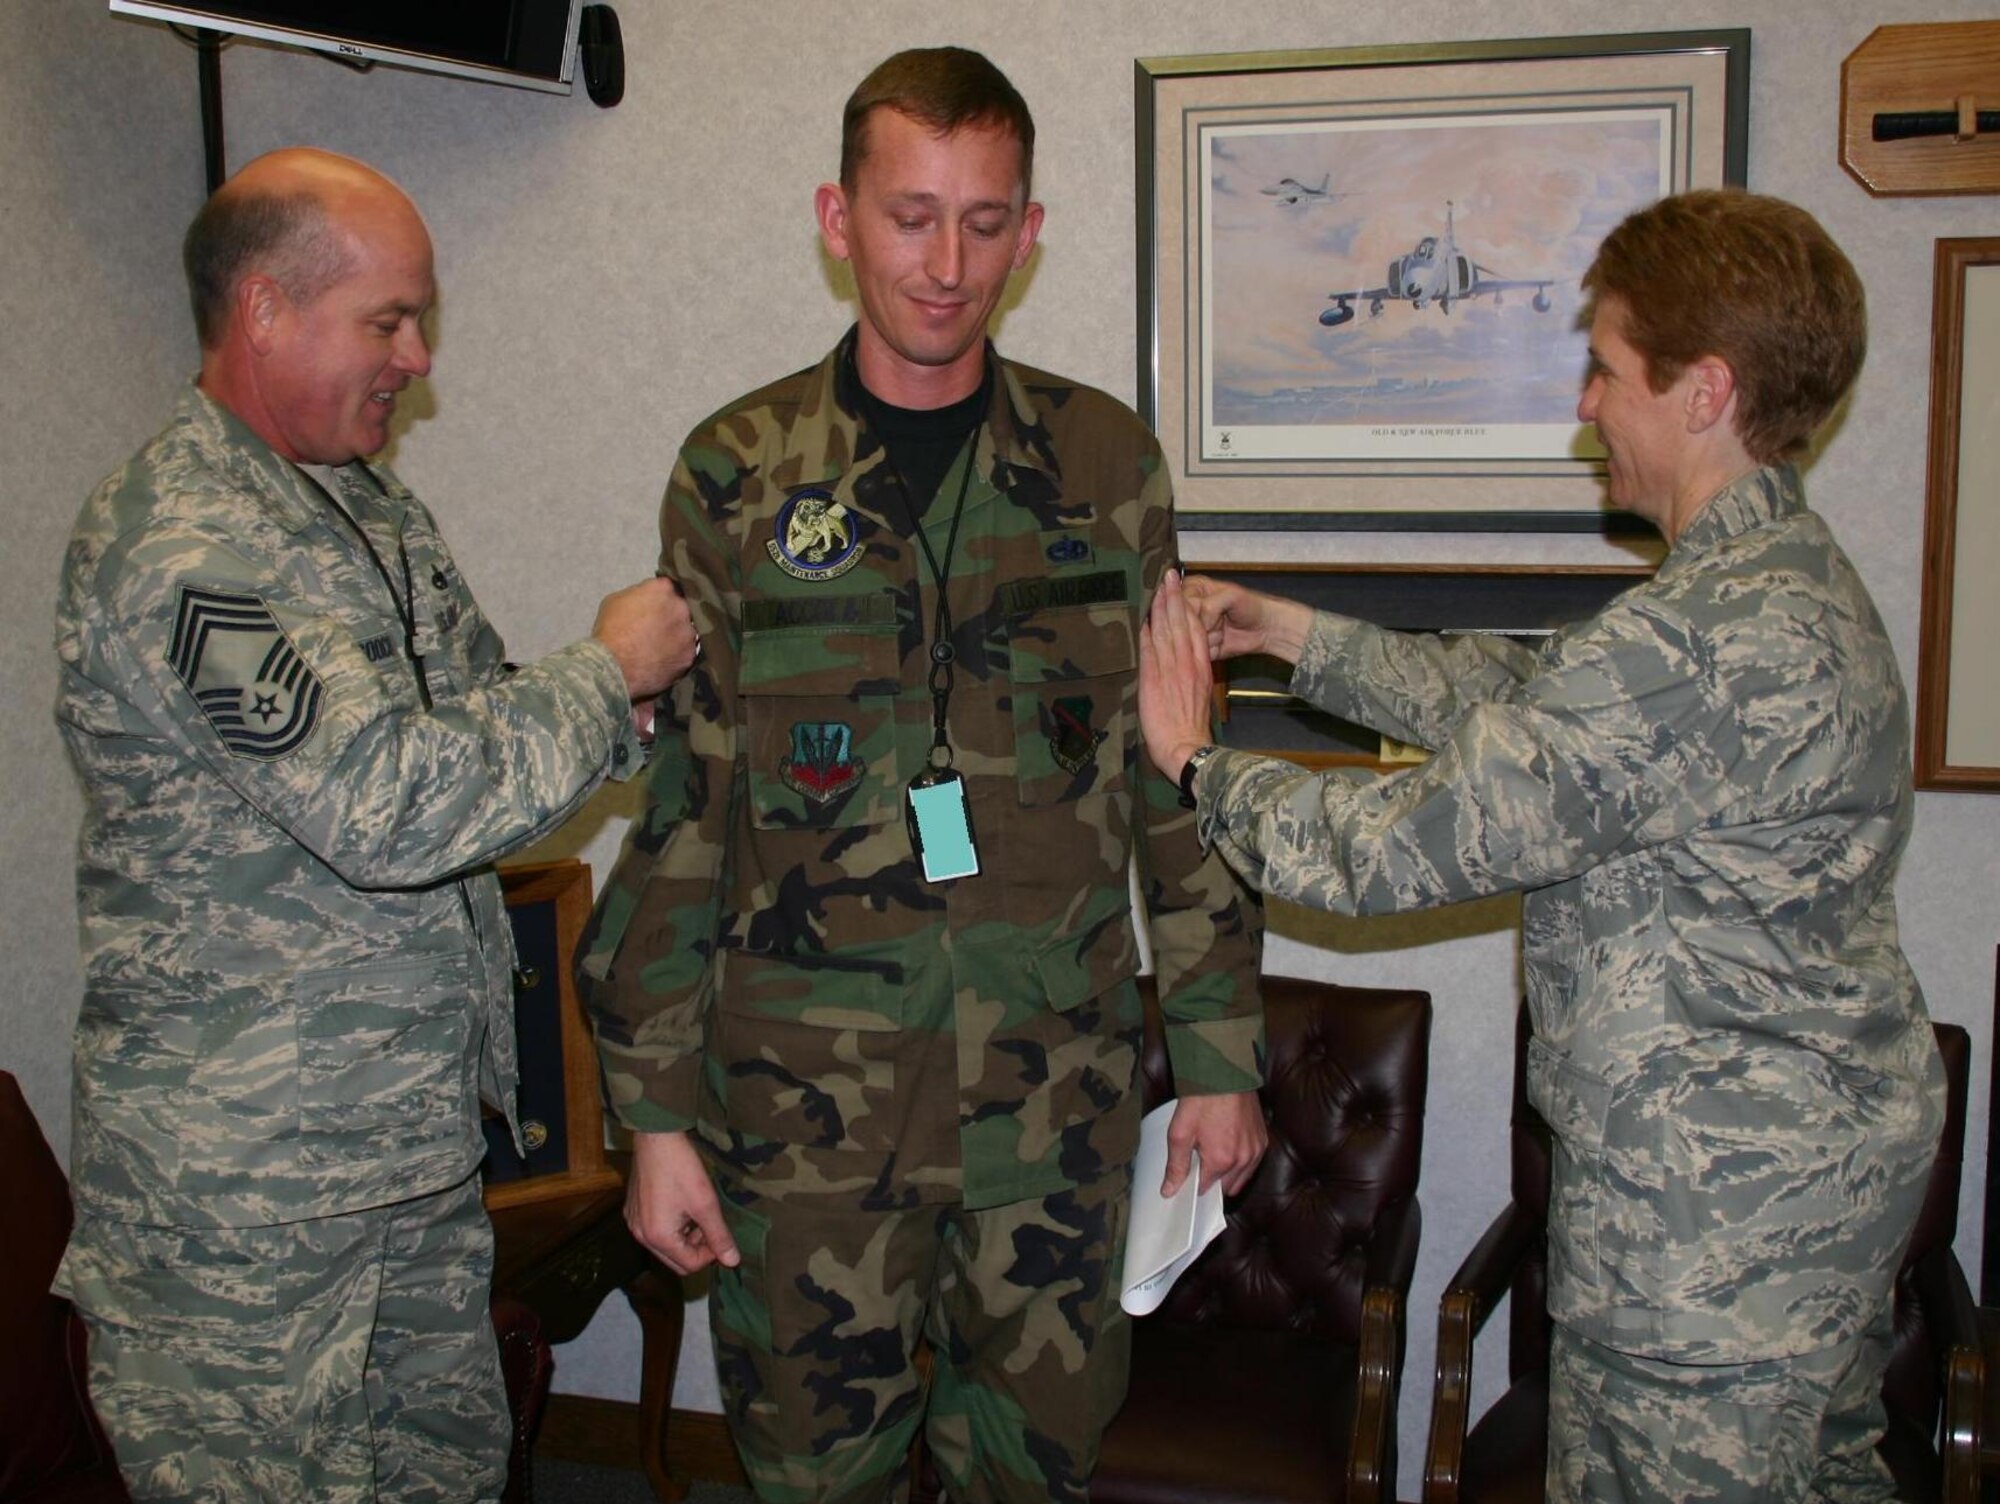 Staff Sergeant John Accola, 552nd Maintenance Squadron, was unexpectedly promoted to technical sergeant by Col. Pat Hoffman, commander, 552 ACW and Chief Master Sgt. Larry Gooch, 552 MXG, while hard at work December 19, 2008.